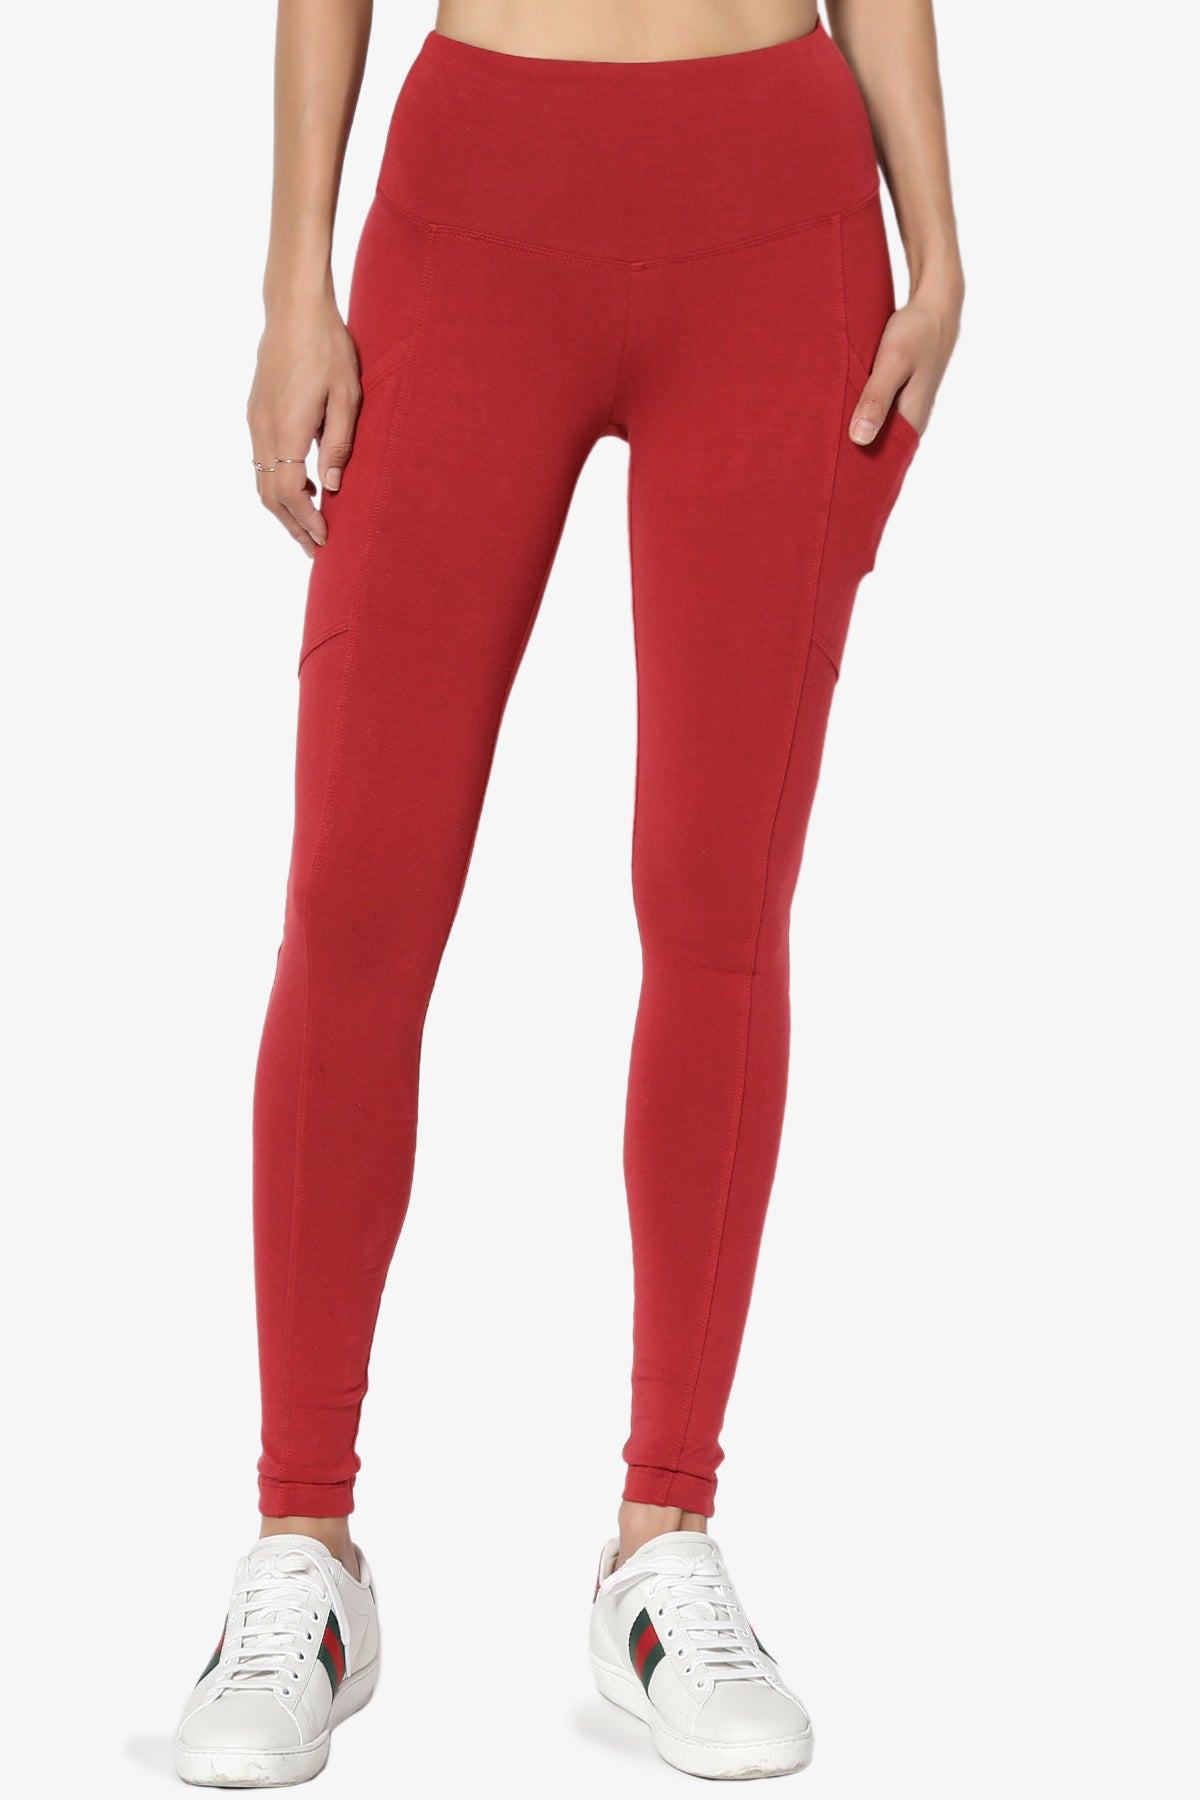 Load image into Gallery viewer, Ansley Luxe Cotton Leggings with Pockets DARK RED_3
